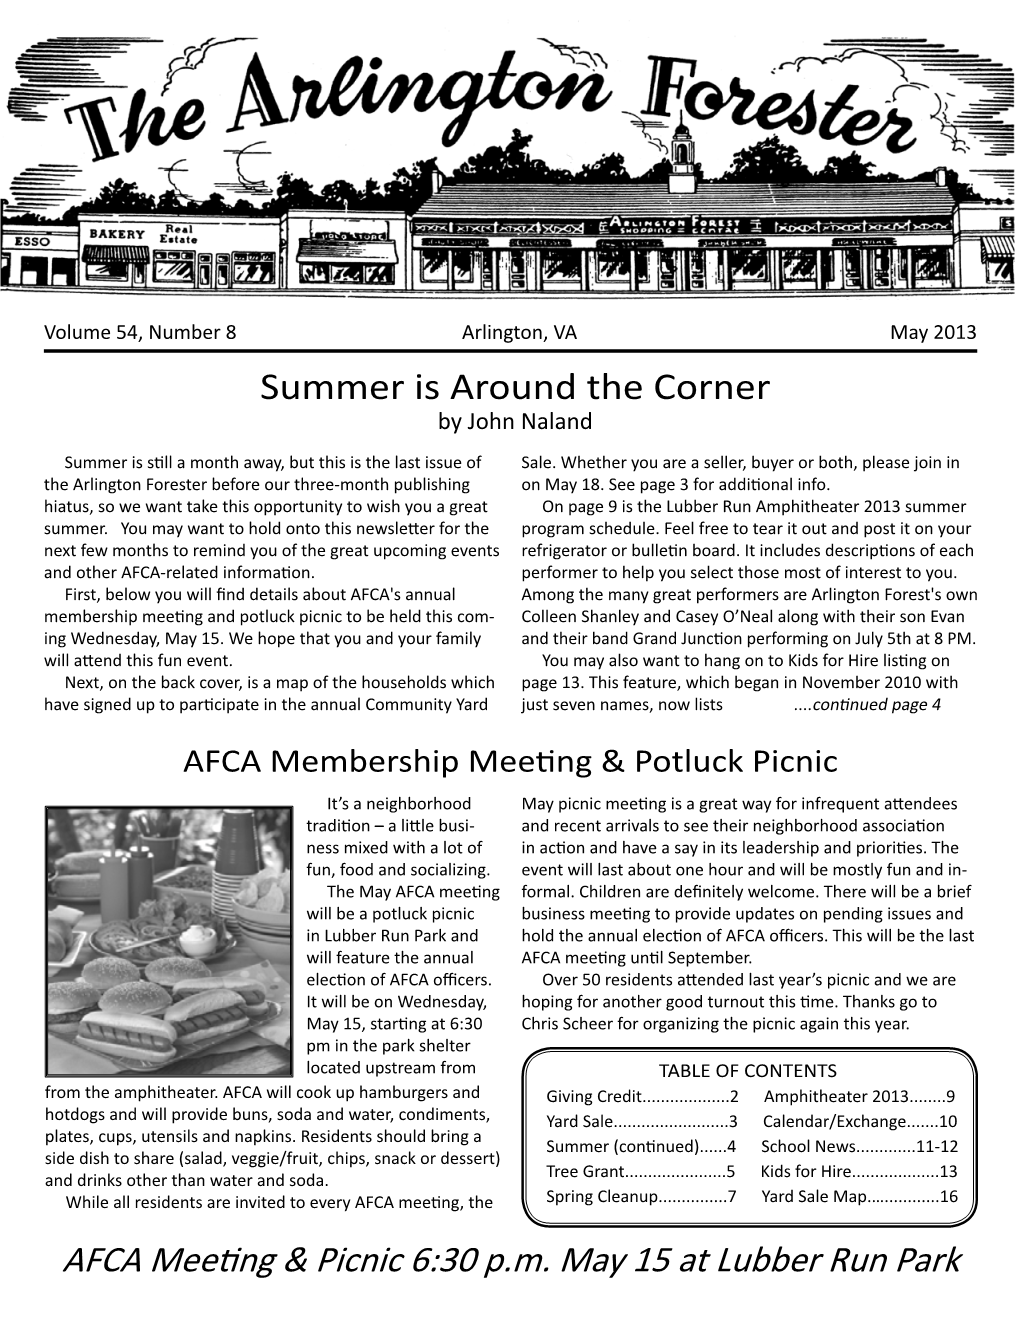 AFCA Meeting & Picnic 6:30 P.M. May 15 at Lubber Run Park Summer Is Around the Corner